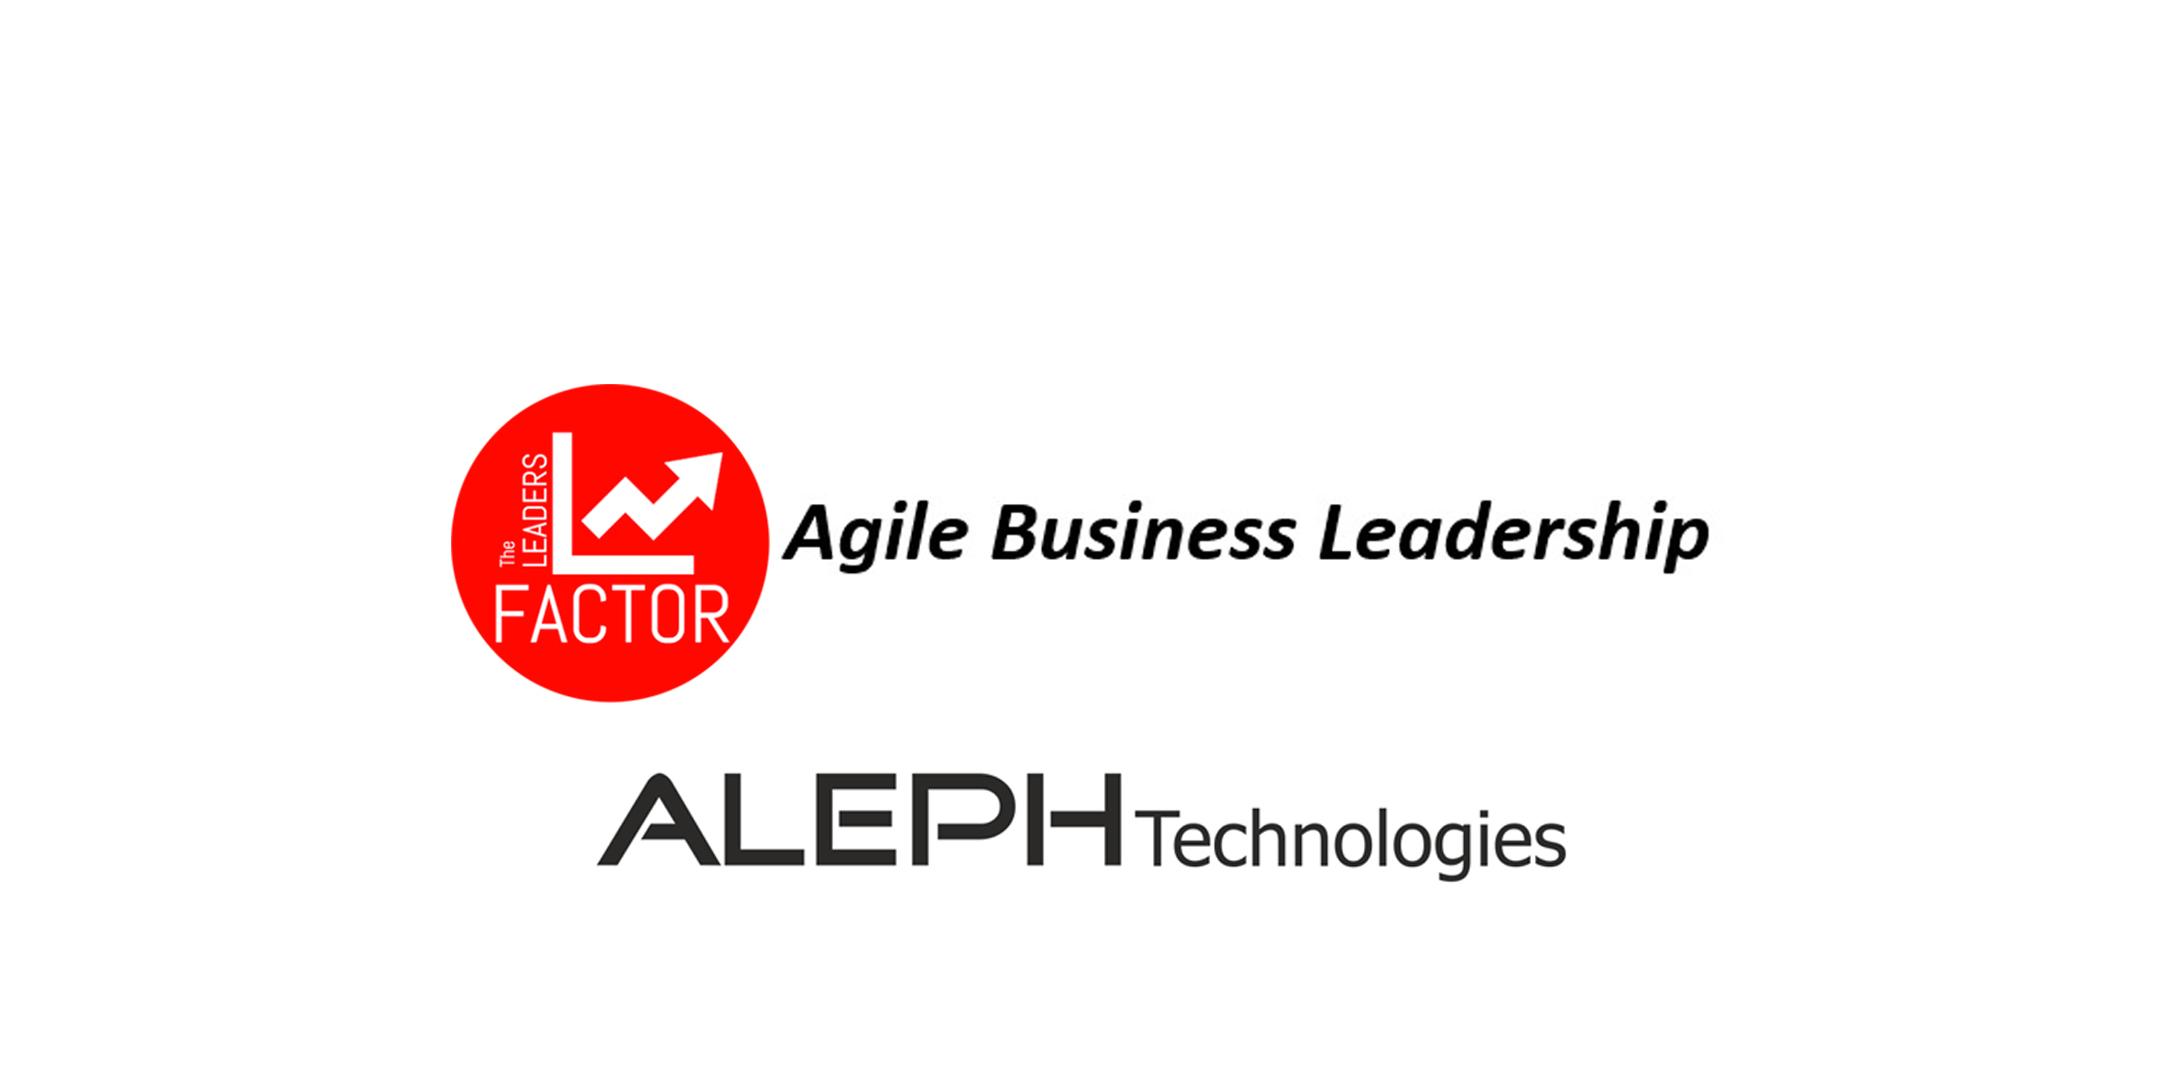 The Leaders Factor - Agile Business Leadership Workshop (May 2nd - 3rd)